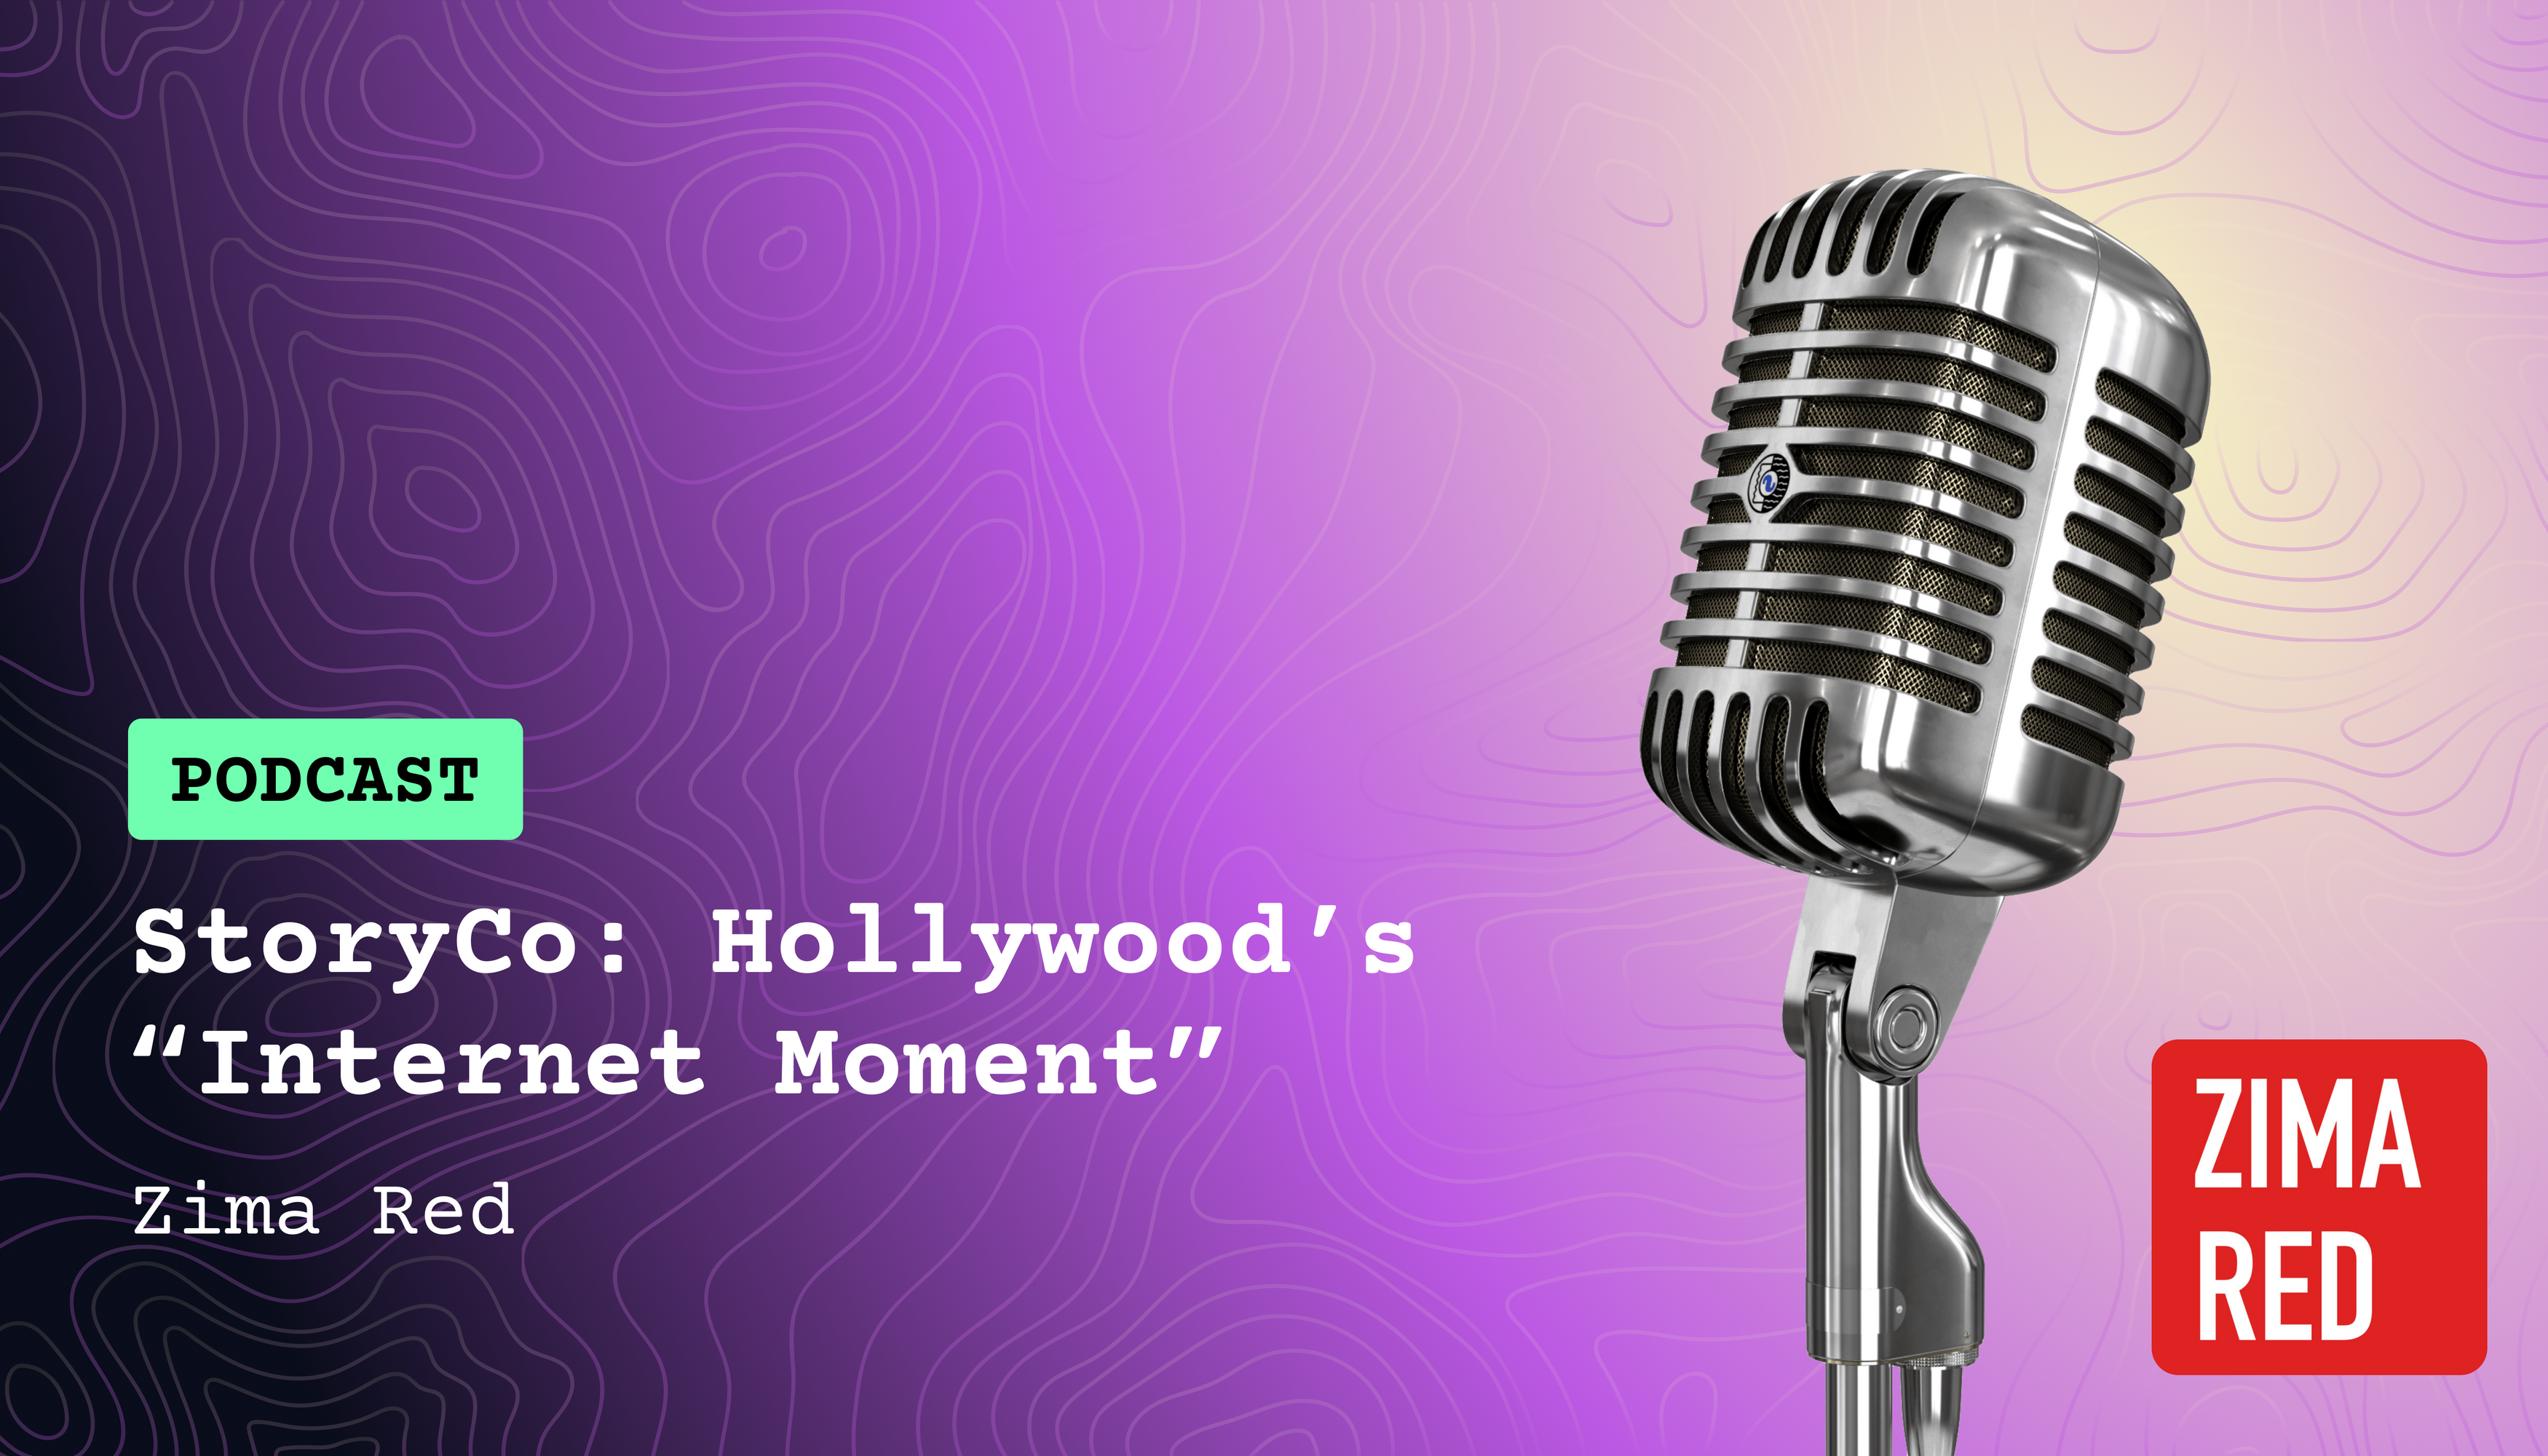 Cover image for Podcast: Zima Red - StoryCo: Hollywood's "Internet" Moment - Justin and J.P. Alanís